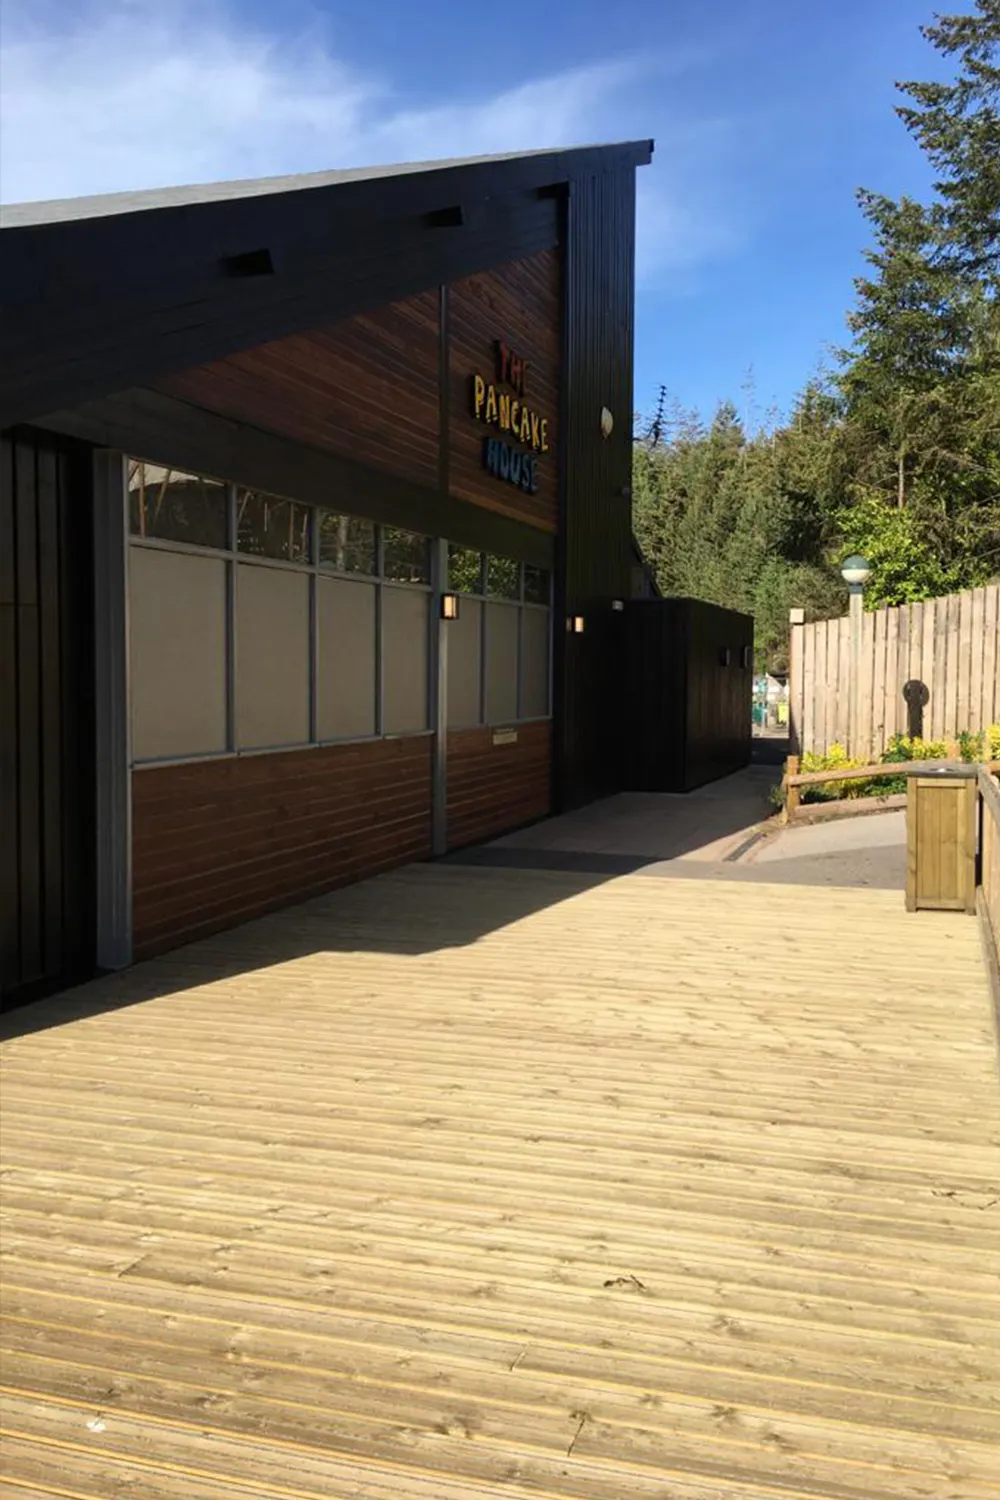 Pancake House at Center Parcs Whinfell Forest with outdoor non-slip decking area